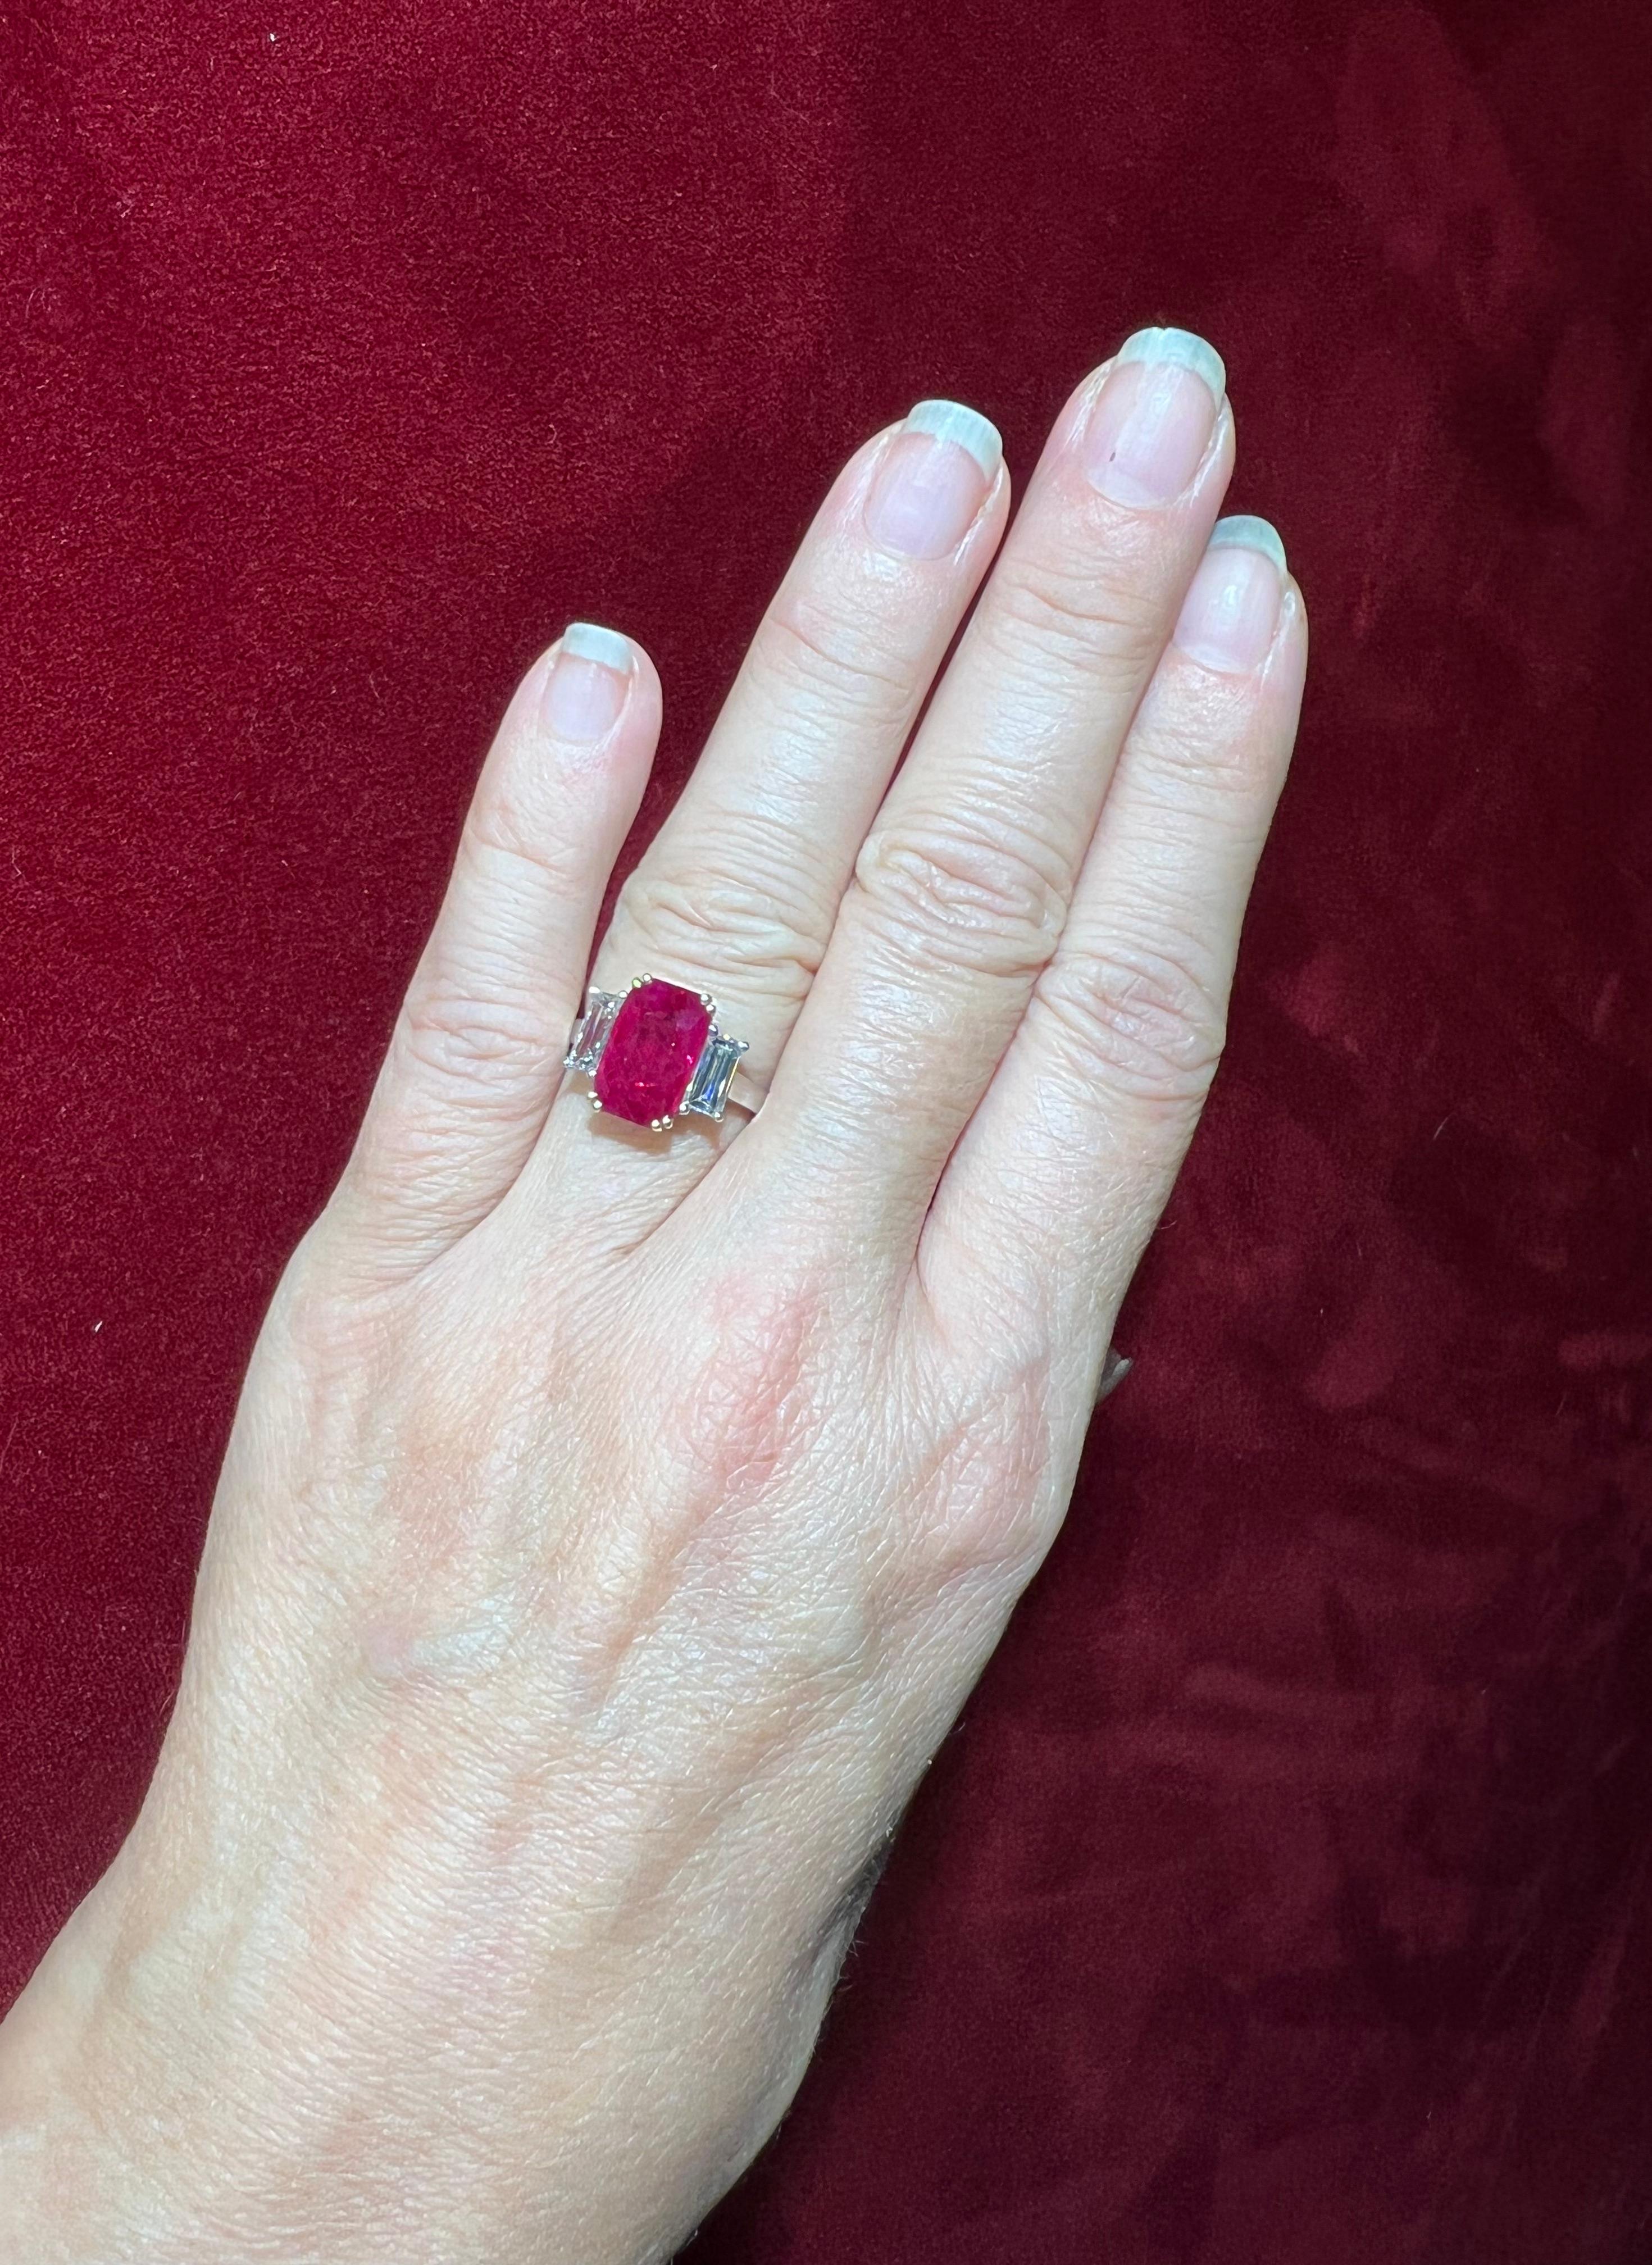 Superb ring in platinum and 18 ct gold featuring in its center a faceted cut ruby of 4.07 carat surrounded by two baguette-cut diamonds for 1.19 carat
certificat :GEM PARIS 
total weight: 5 g
size: 6 or size: 52